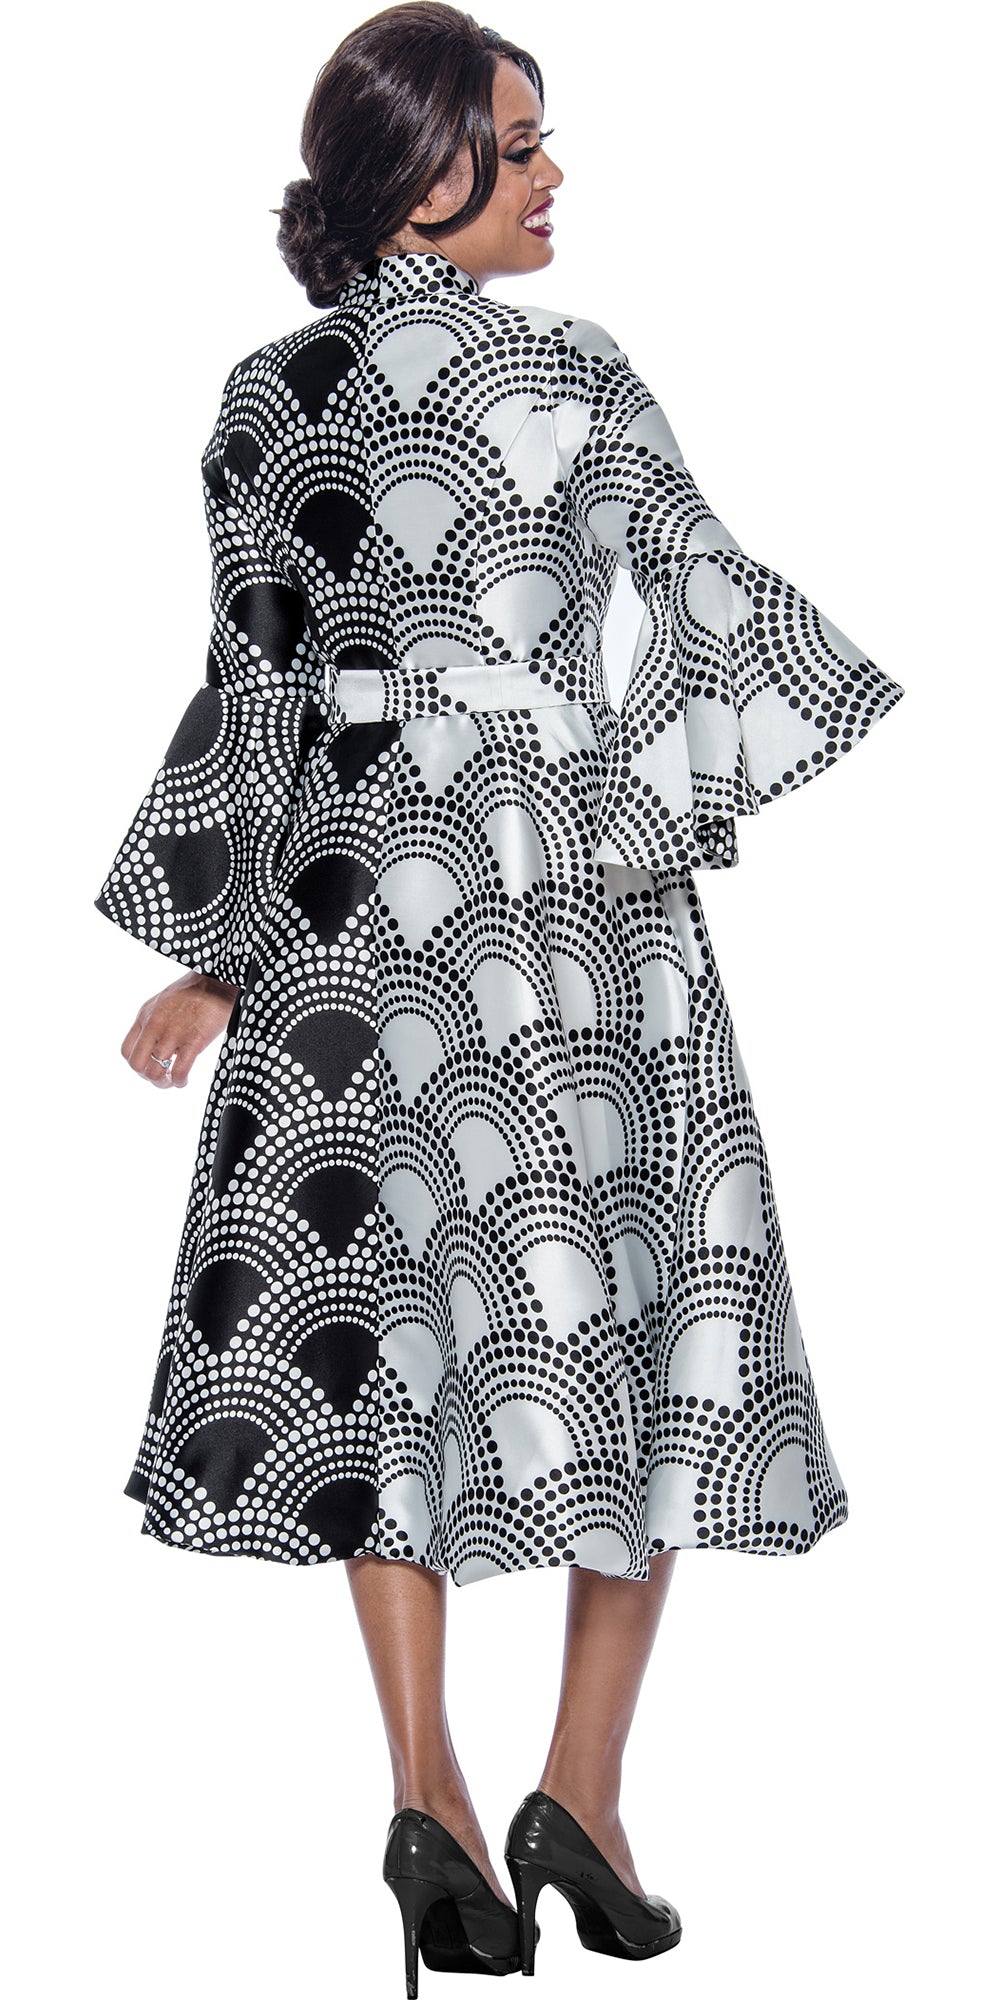 Dresses by Nubiano 12291 - Black White - Print Dress with Flare Sleeves